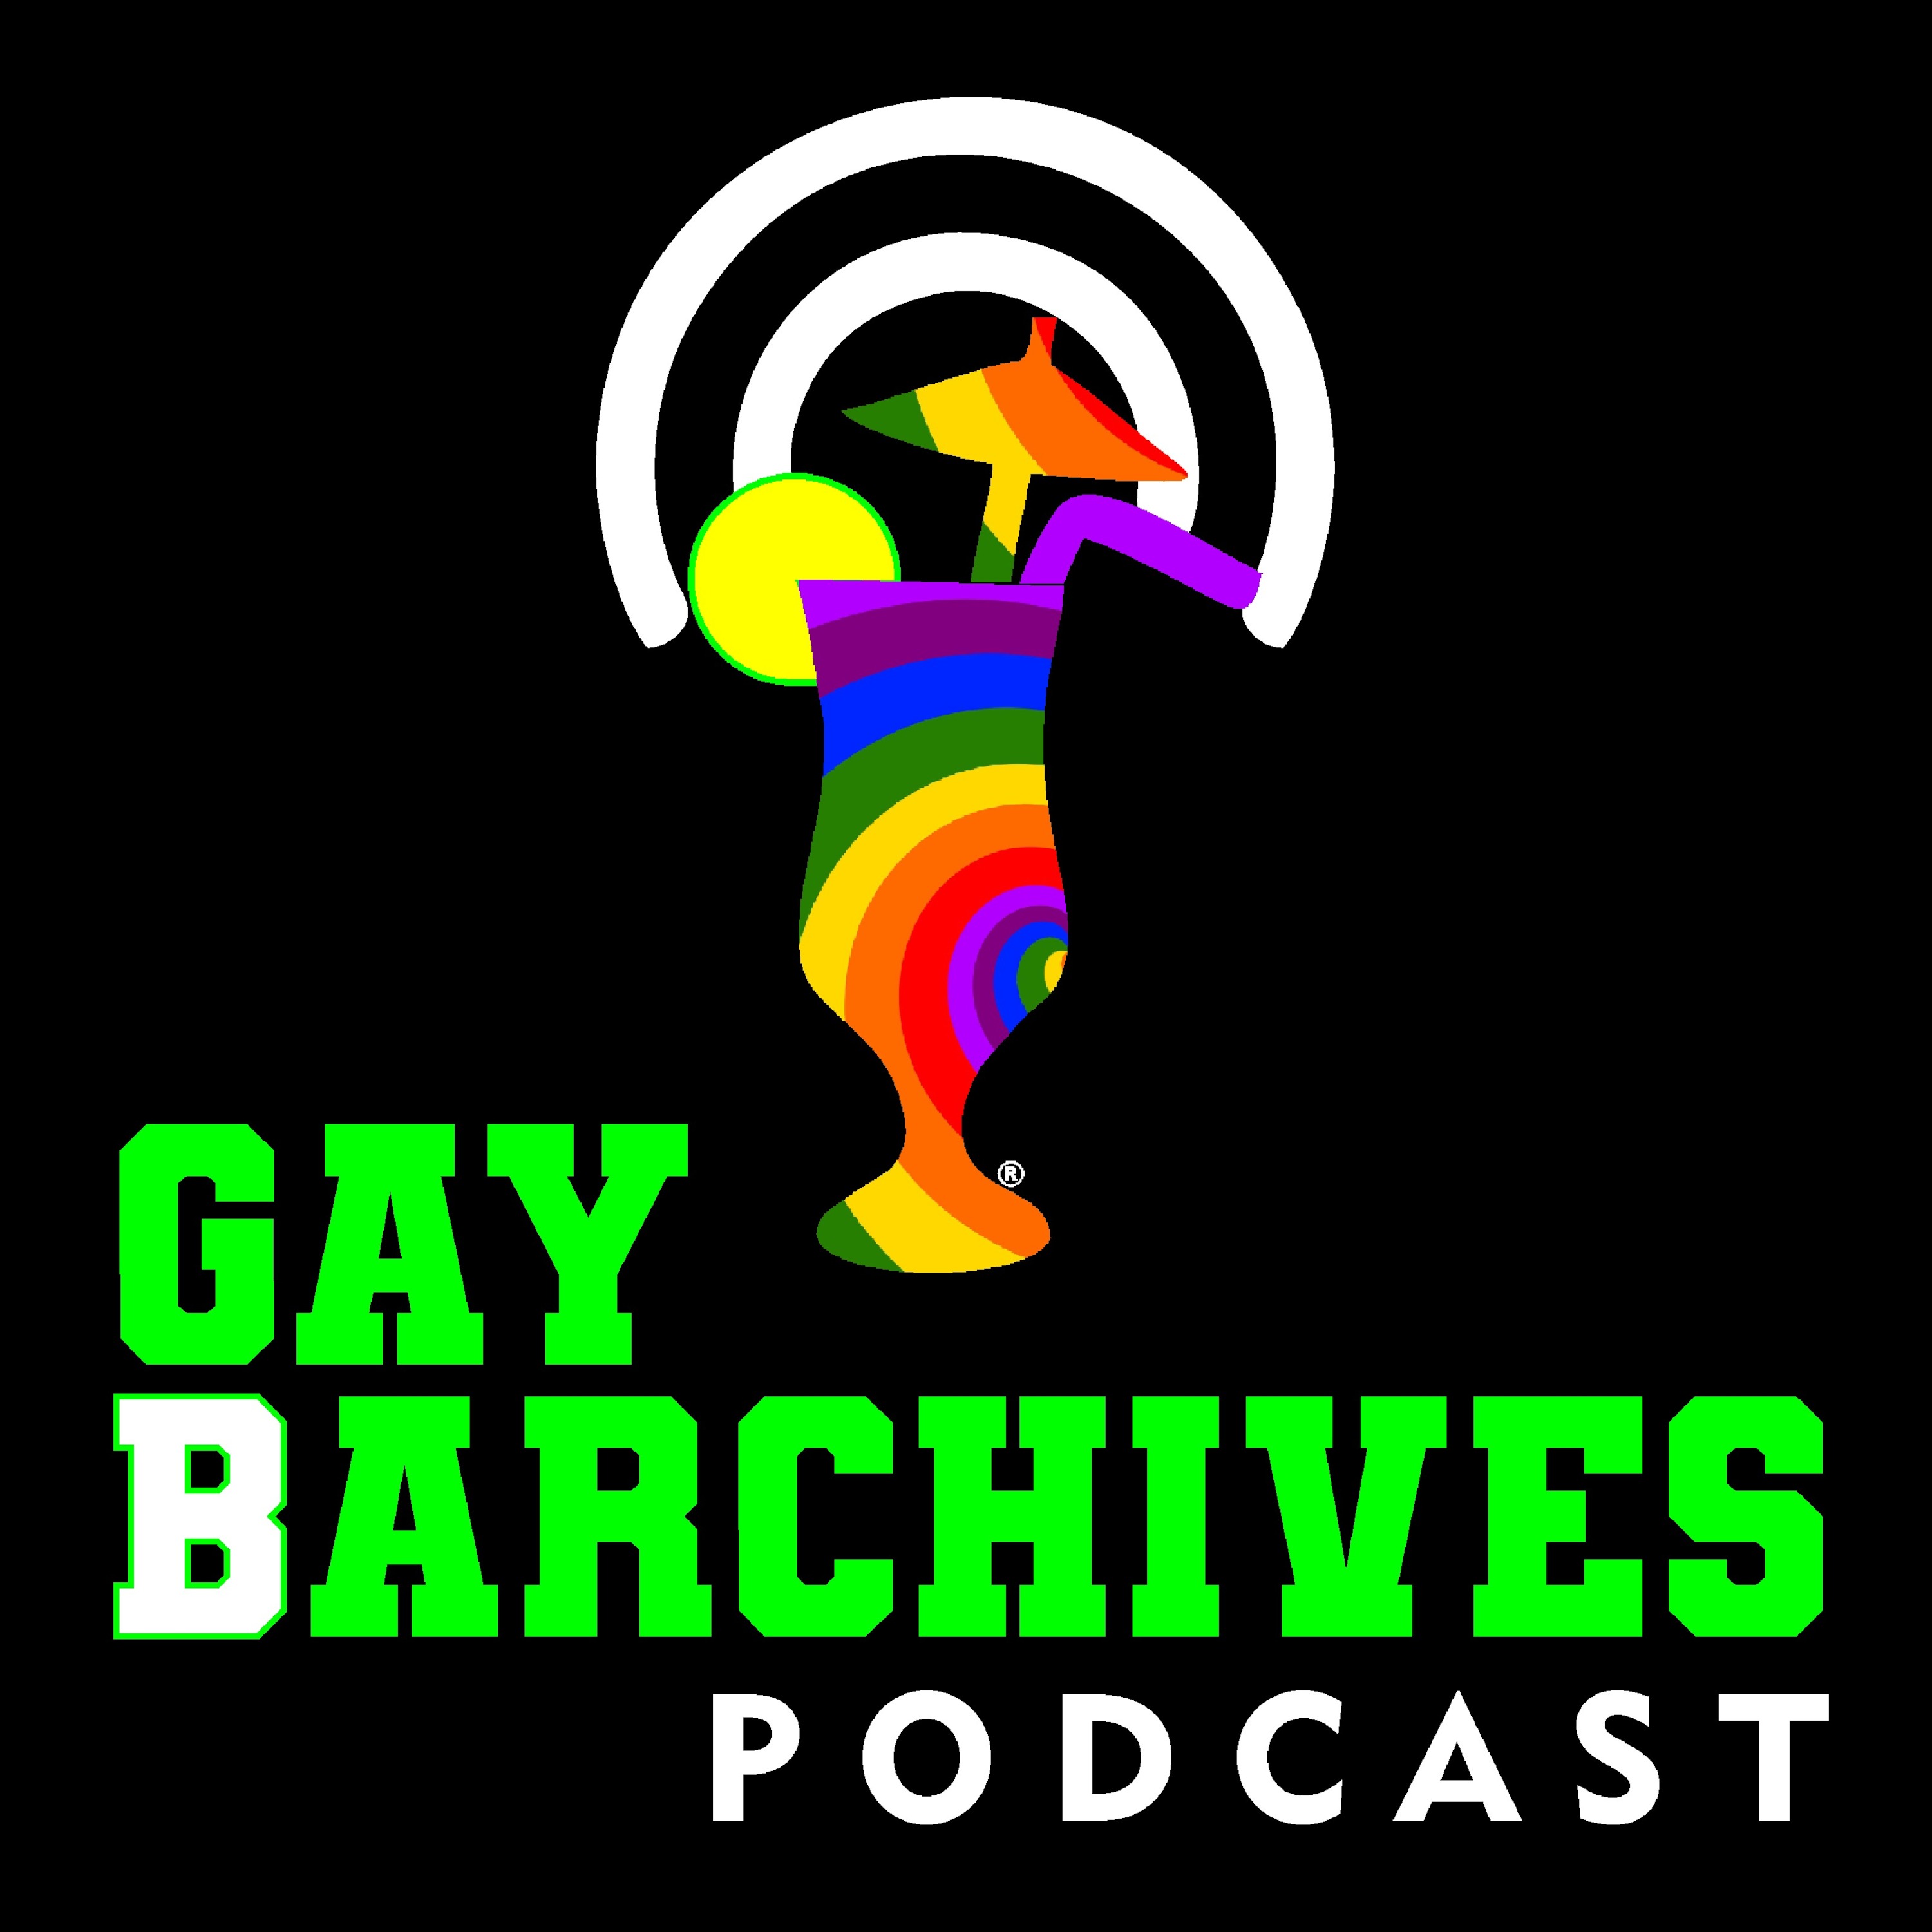 Episode 24: Frank Perez [New Orleans] on GayBarchives